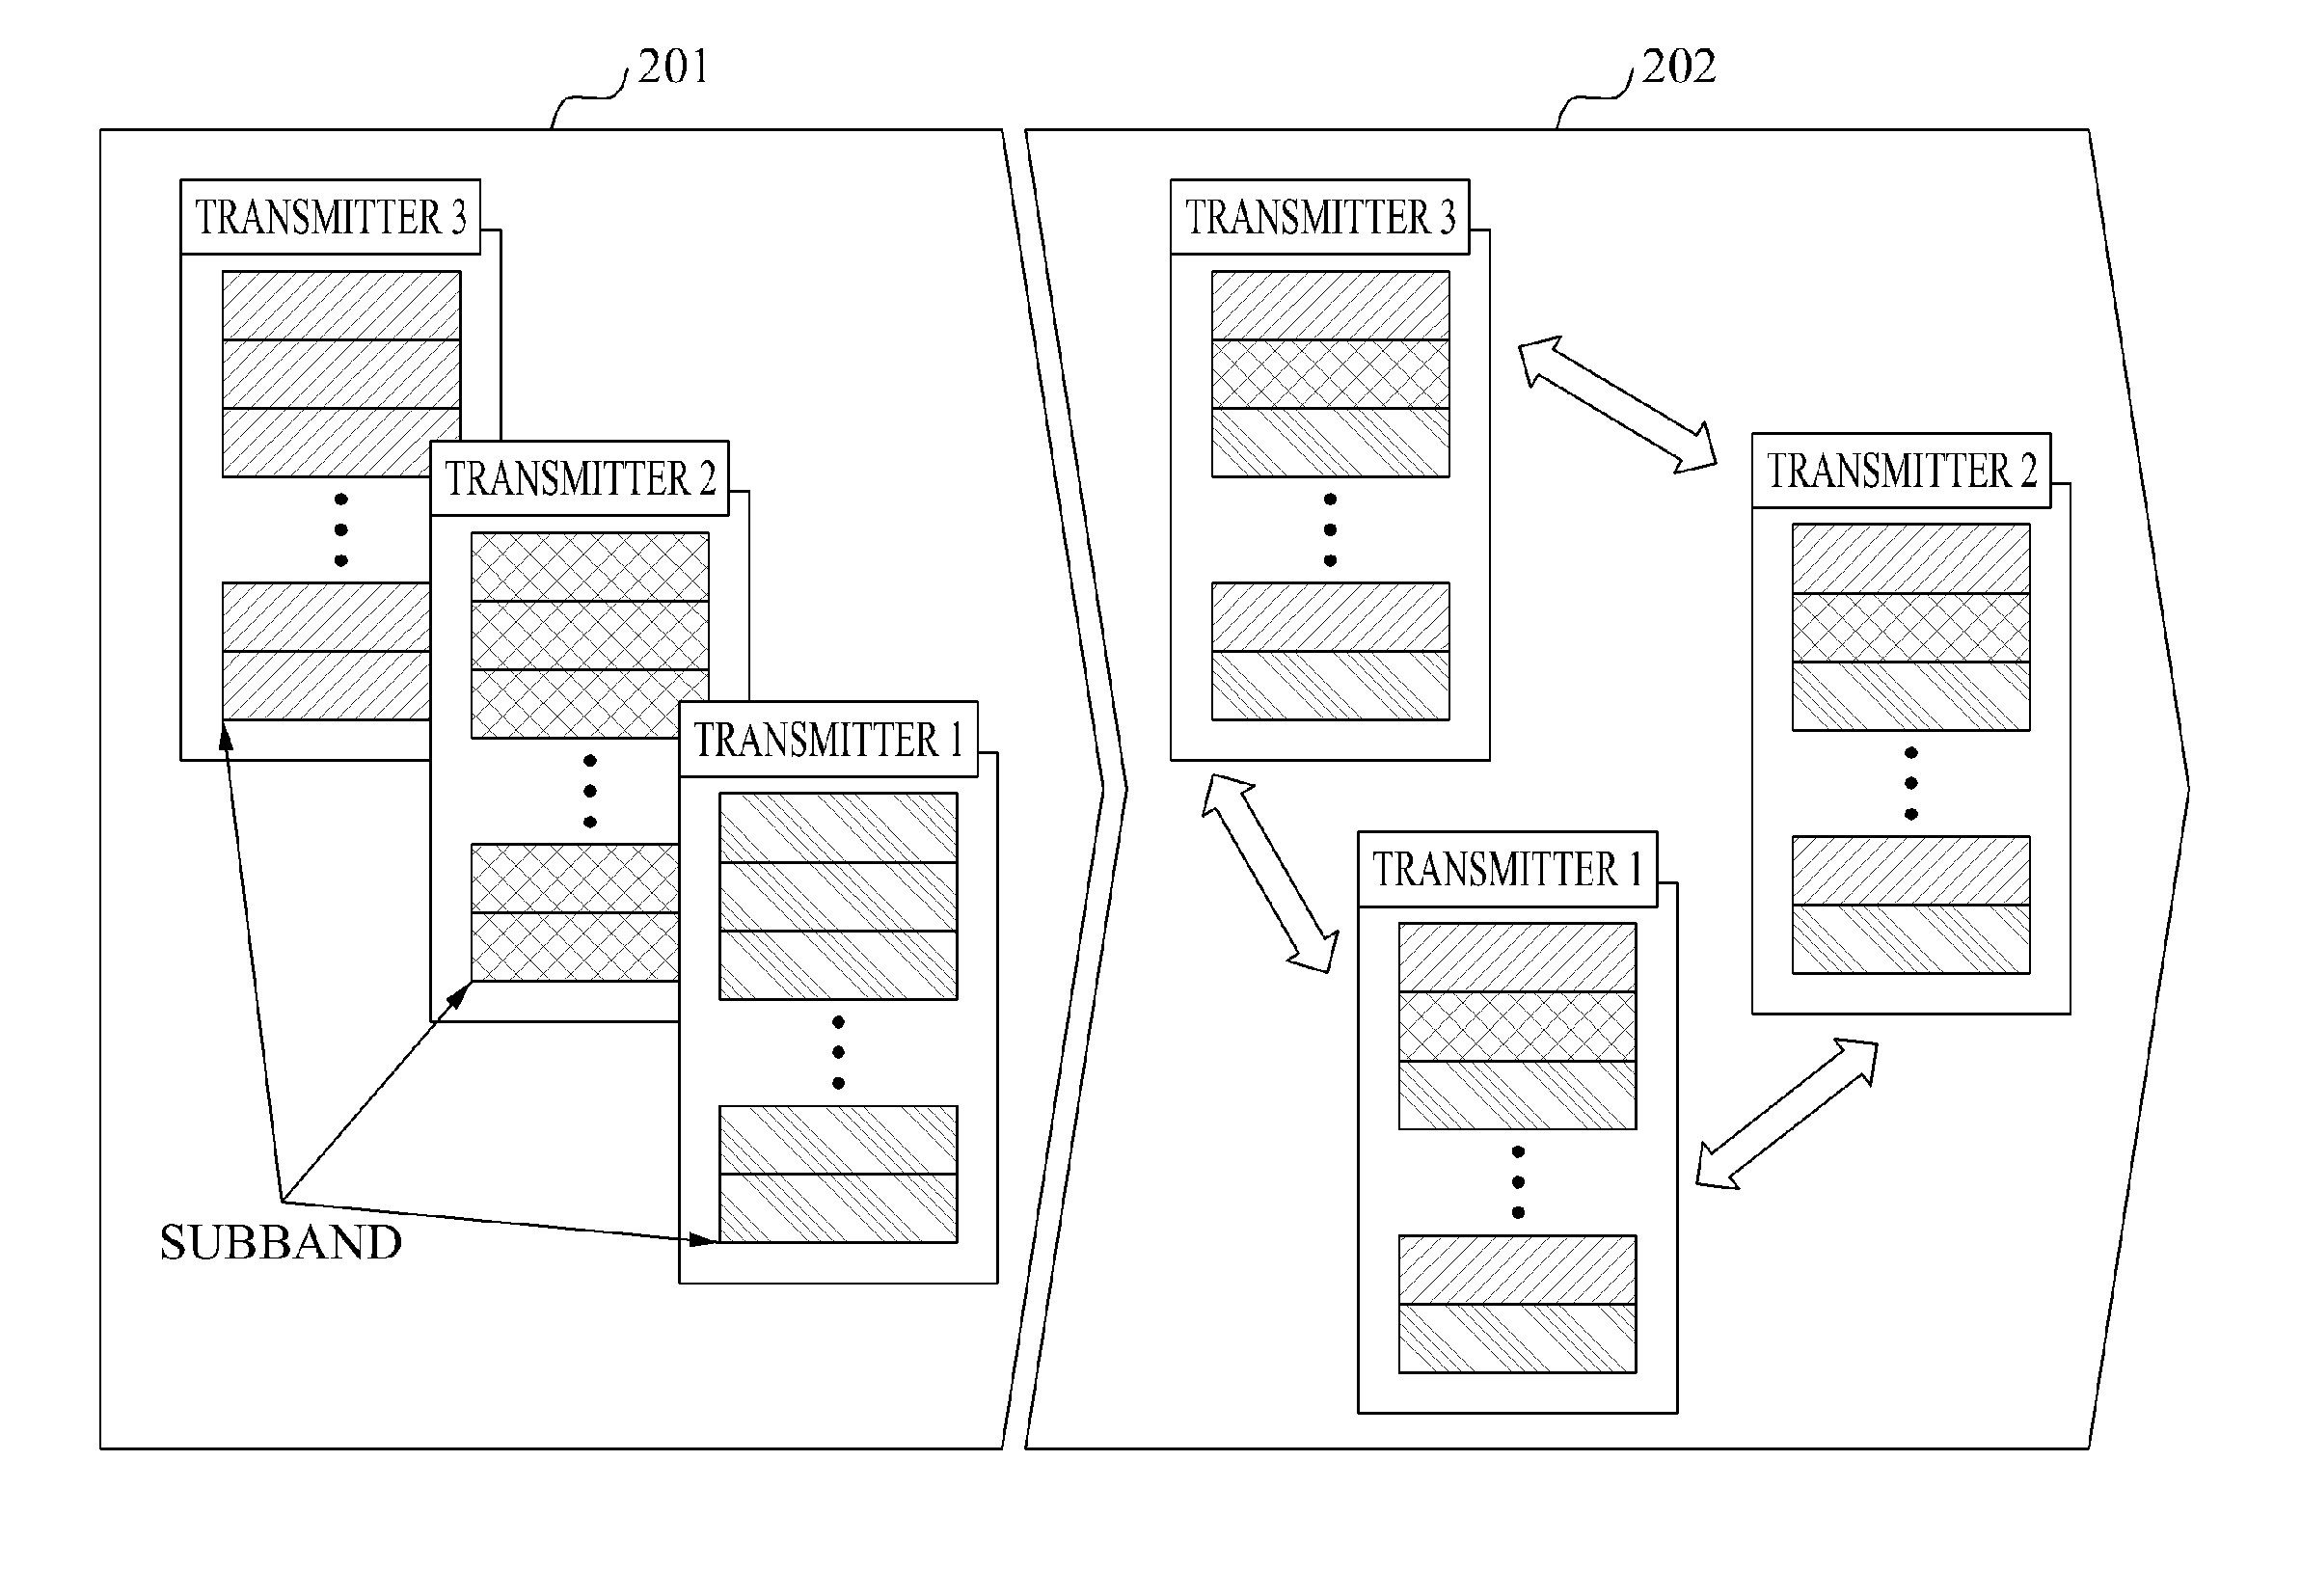 Method and apparatus for coordinated multi-point communication for each sub-band based on long-term channel state information